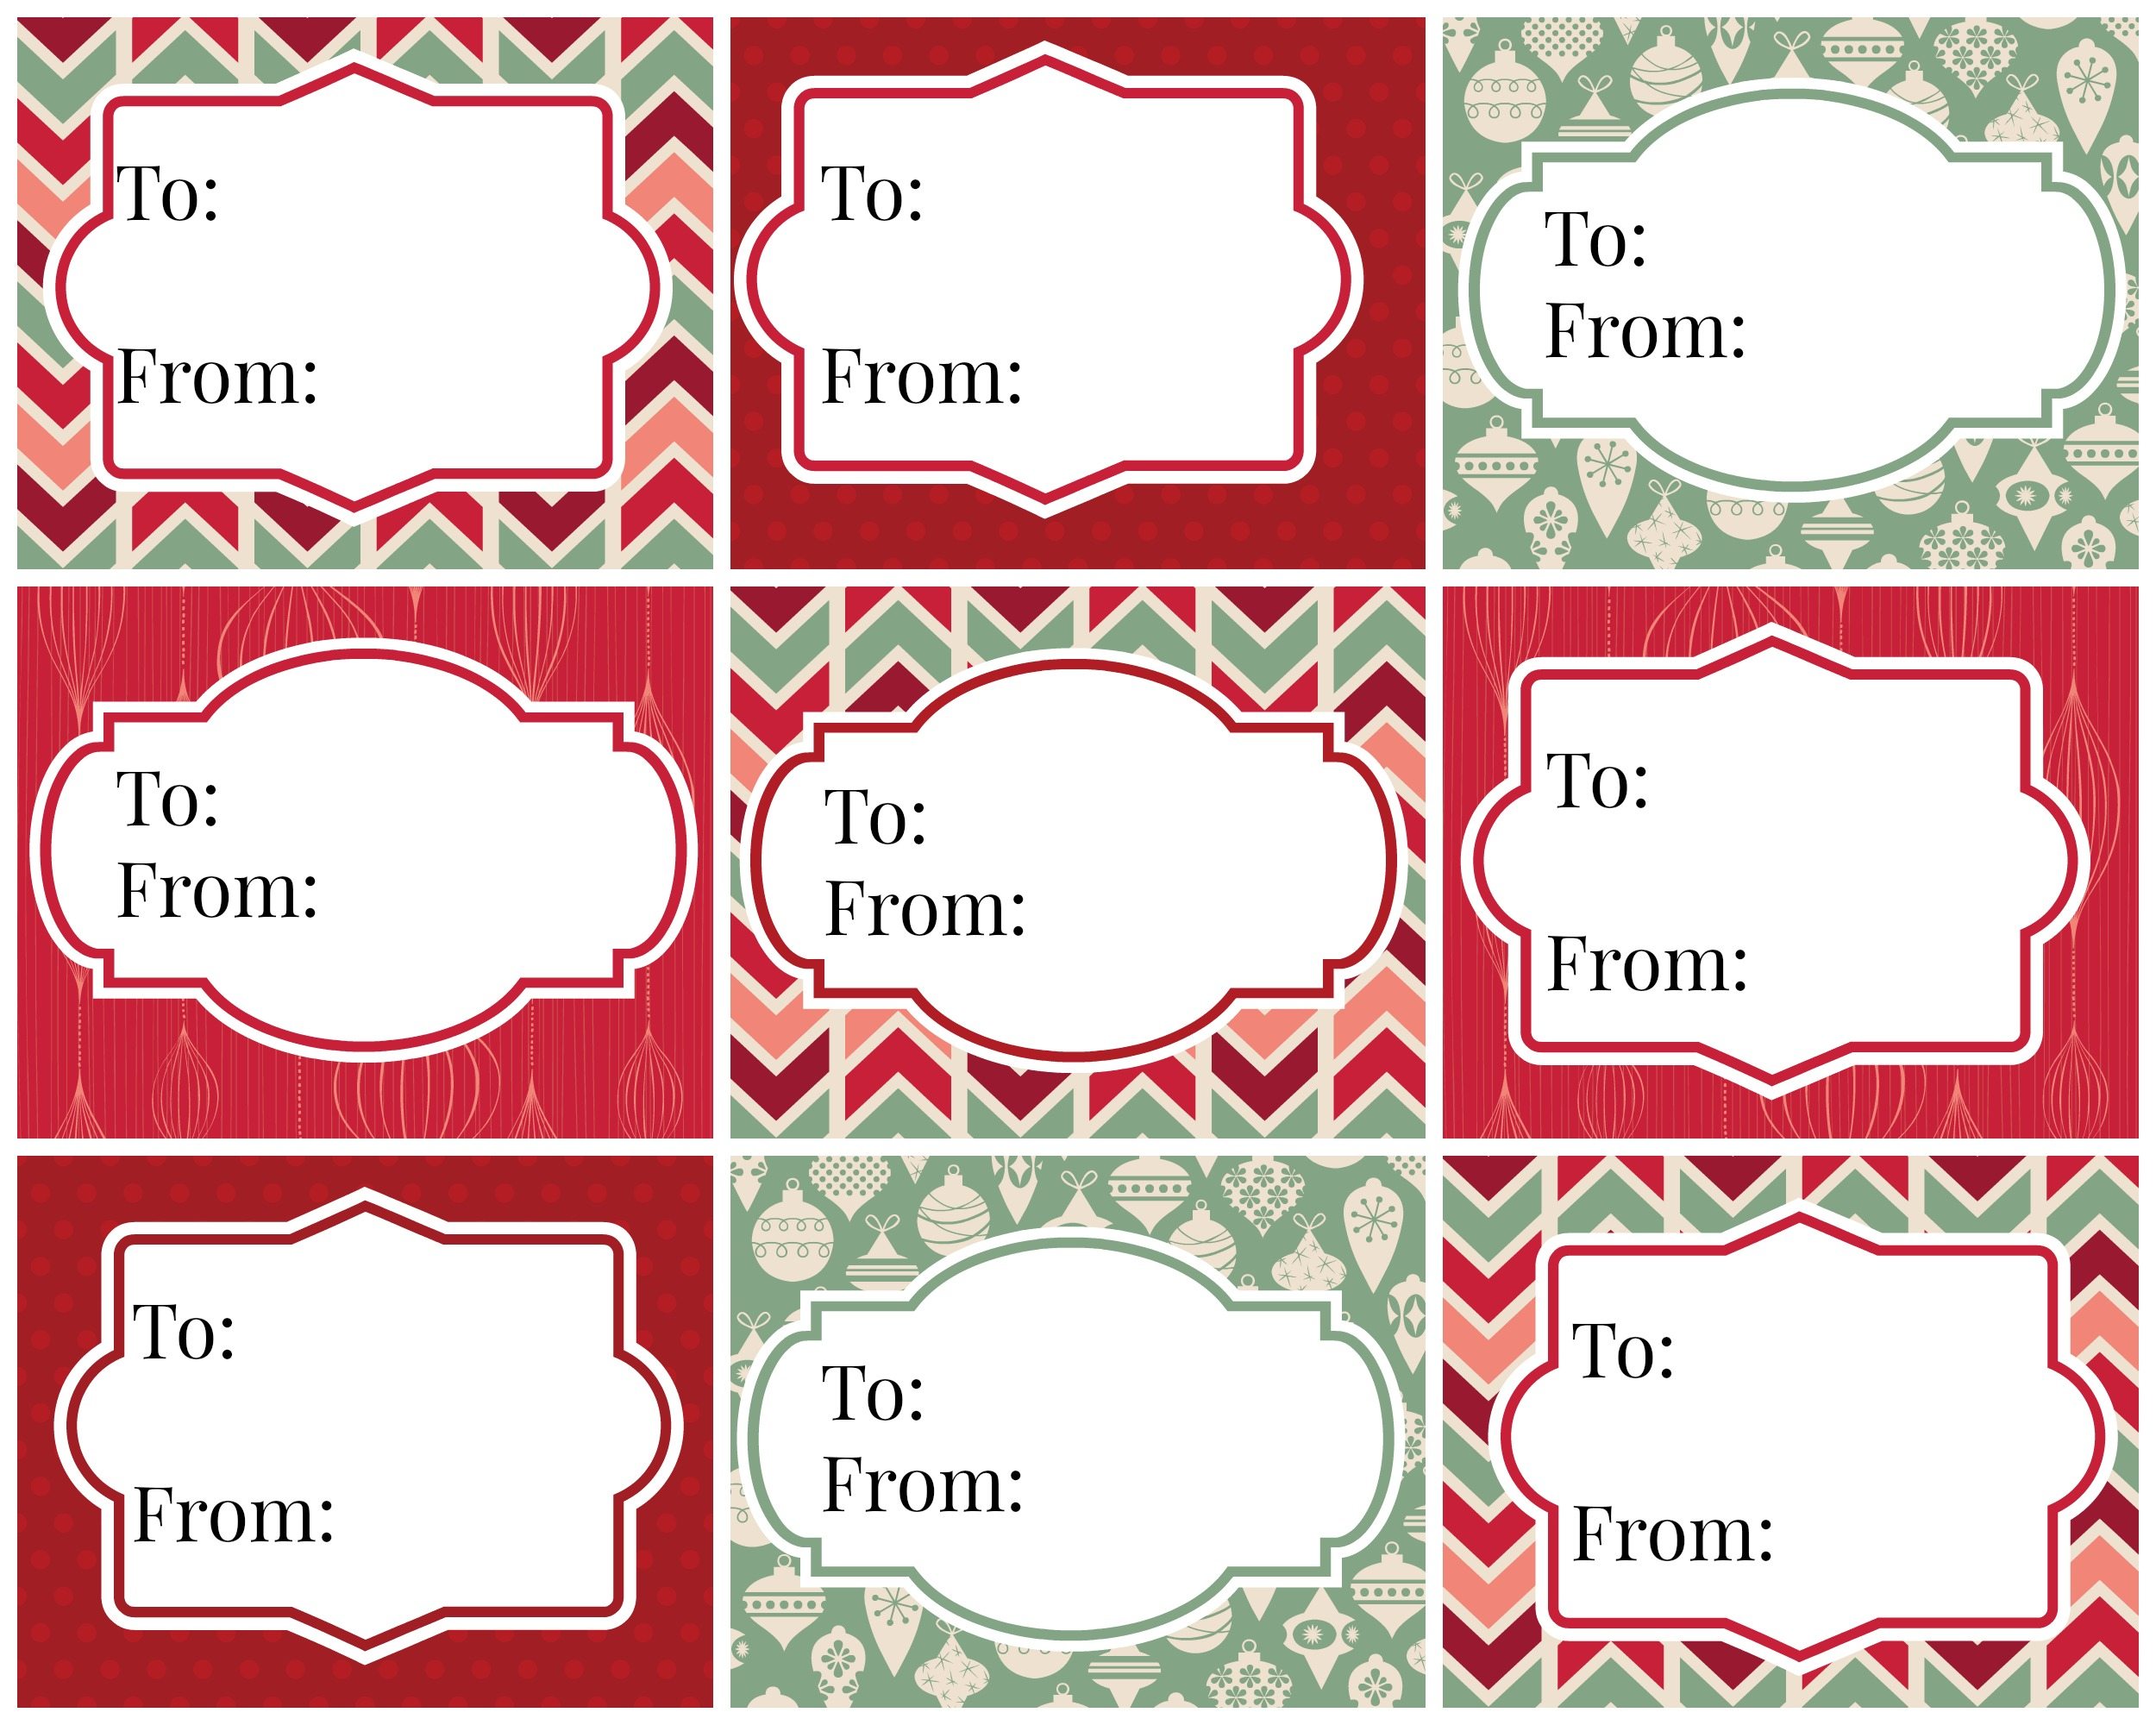 world-label-exclusive-christmas-gift-tag-printable-ch-free